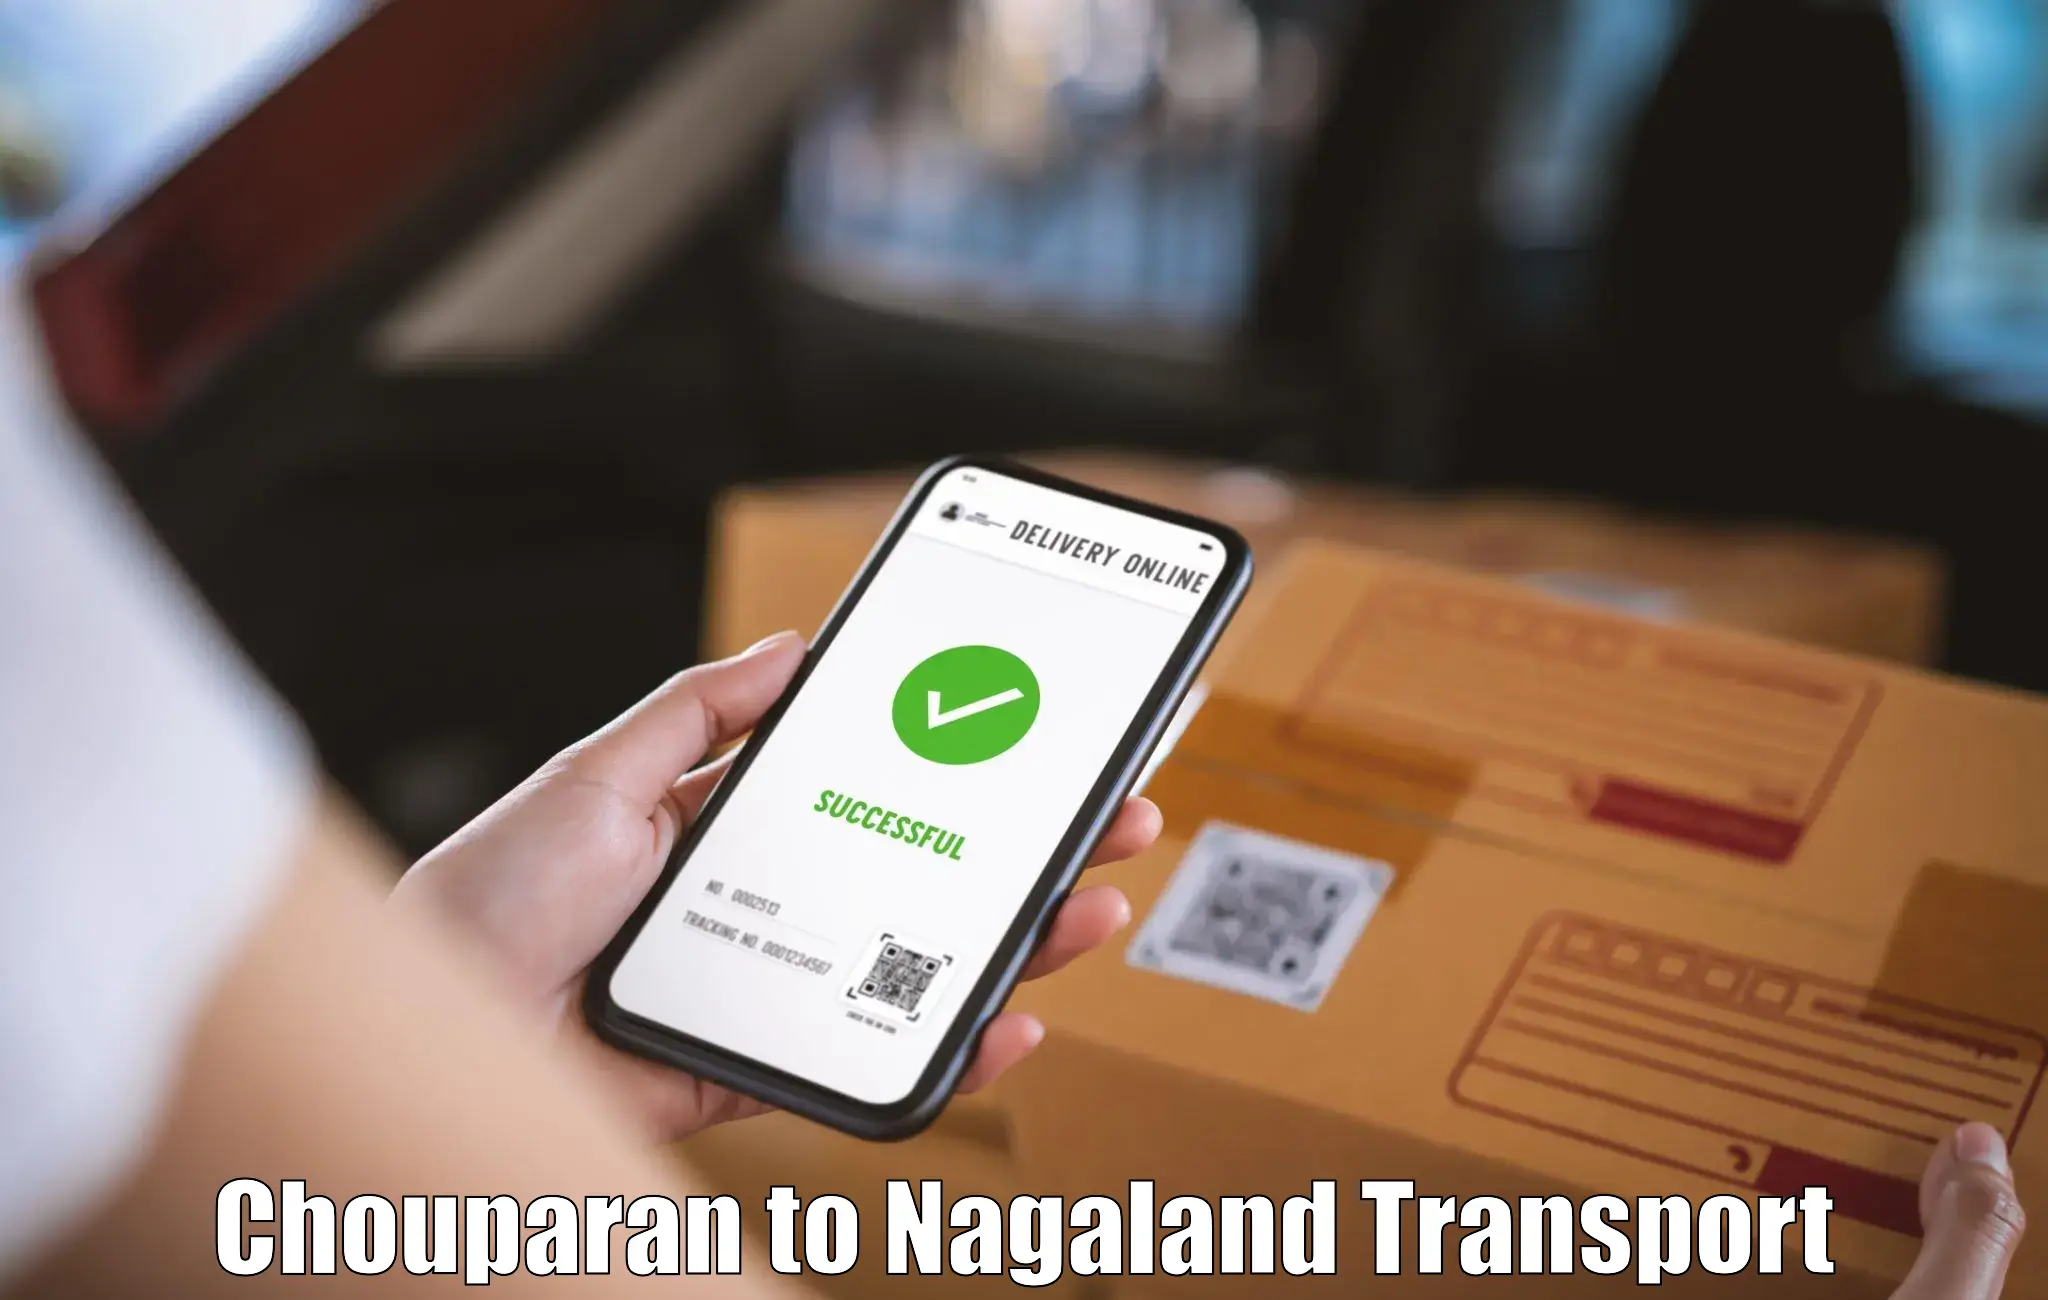 Road transport online services Chouparan to NIT Nagaland